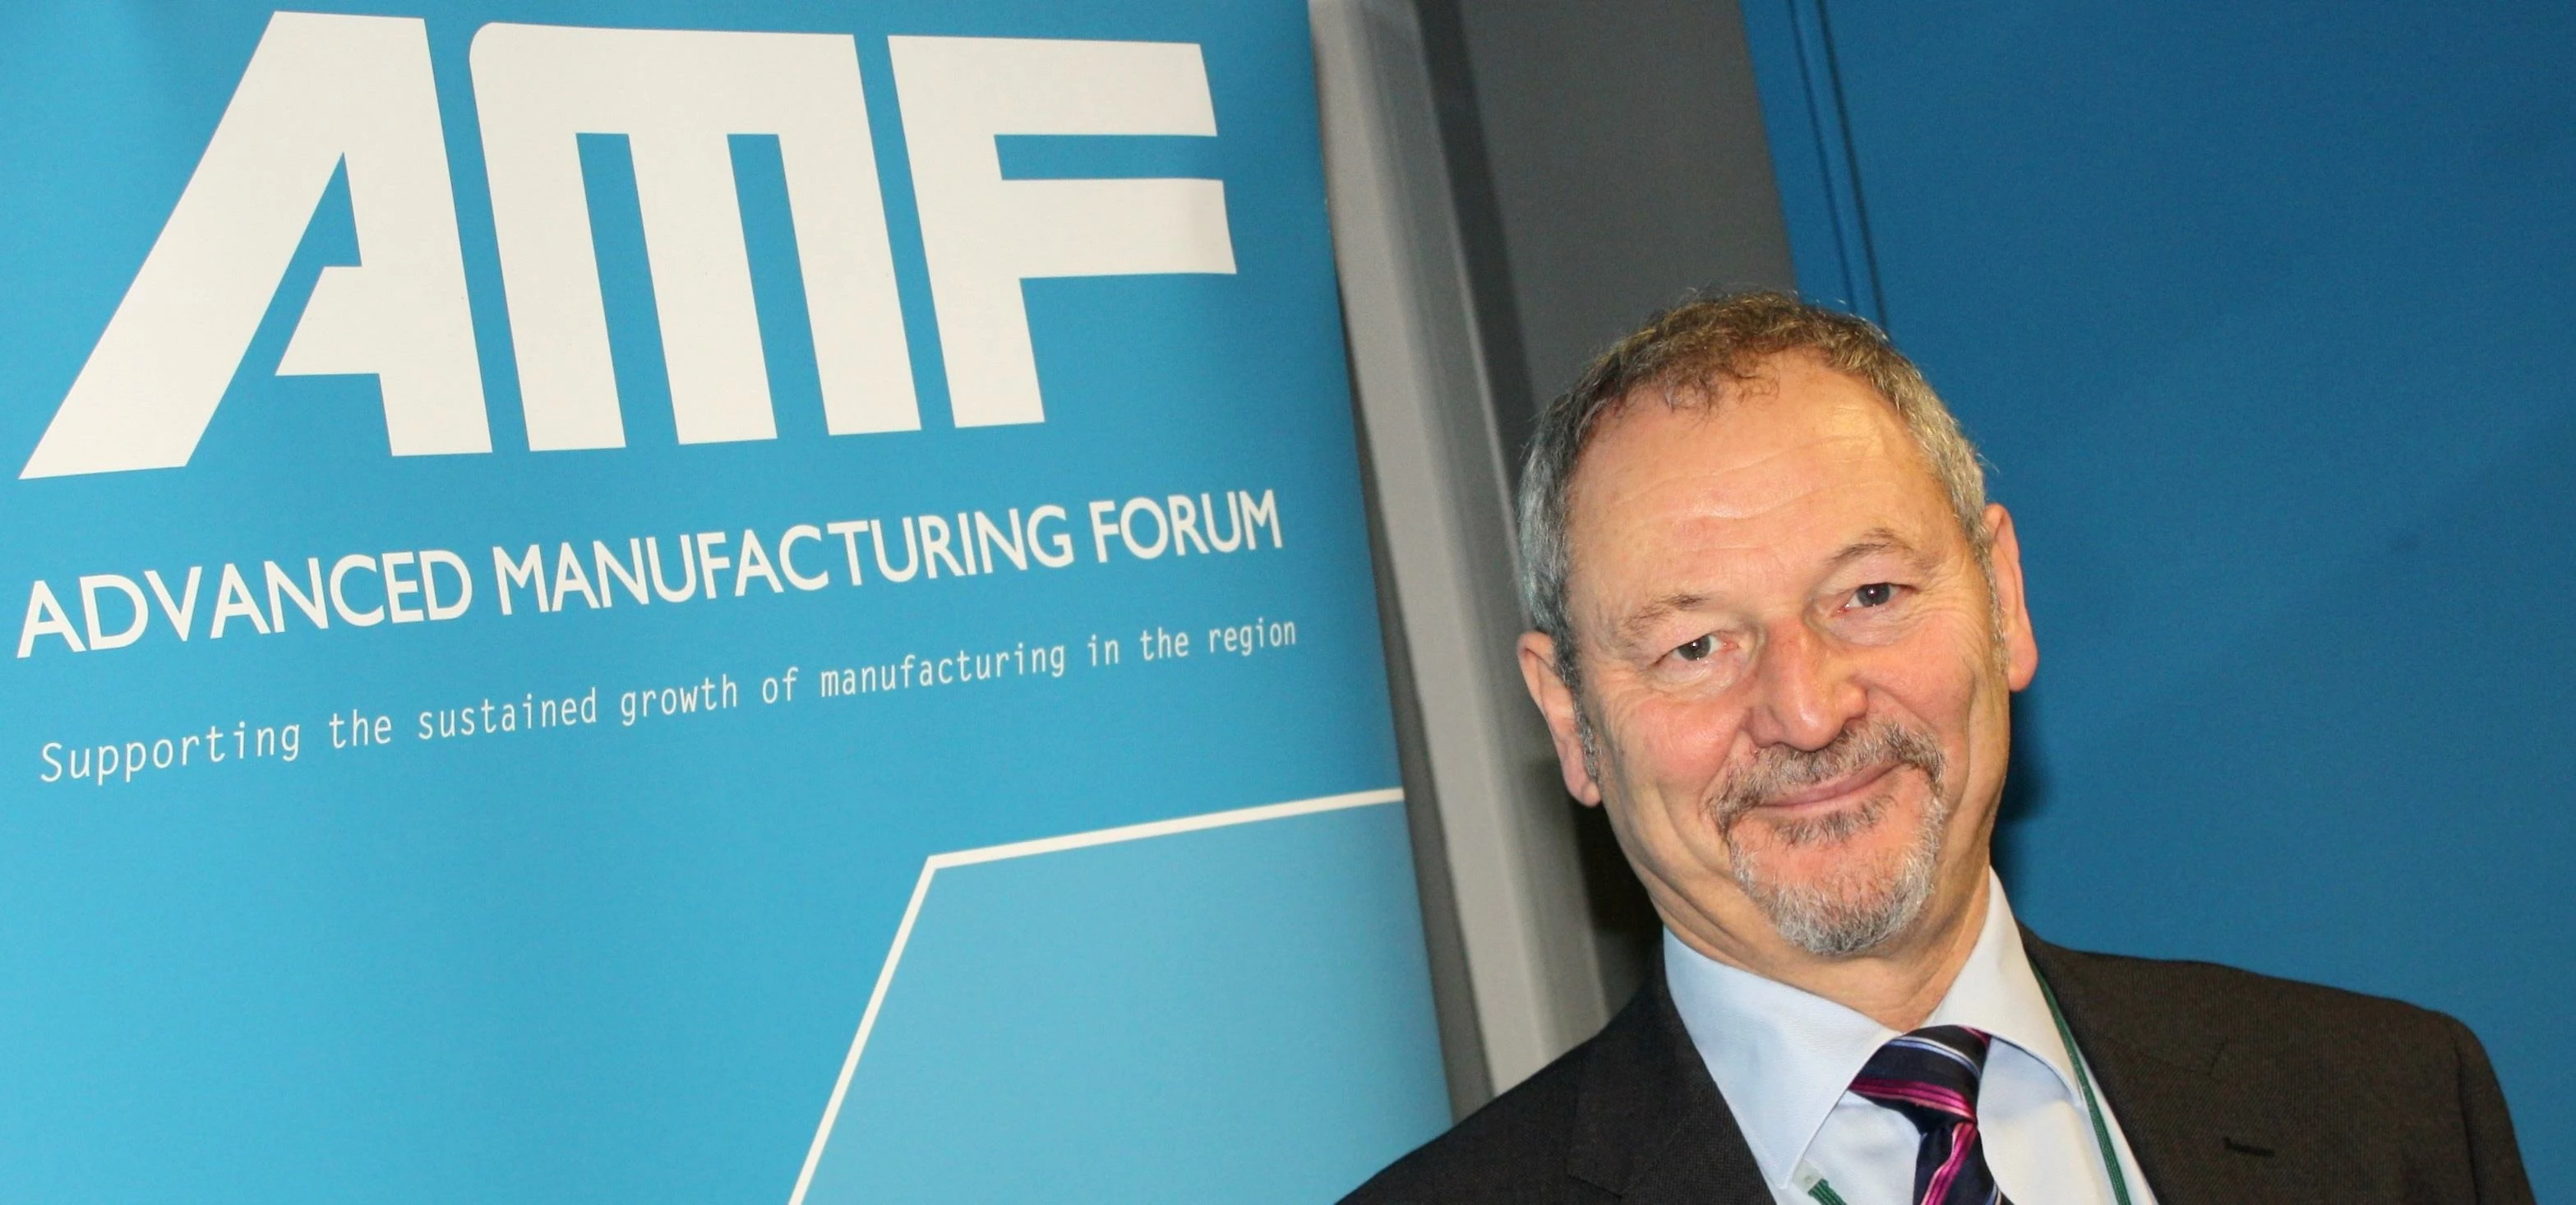 Jack Hanwell, from the Advanced Manufacturing Forum